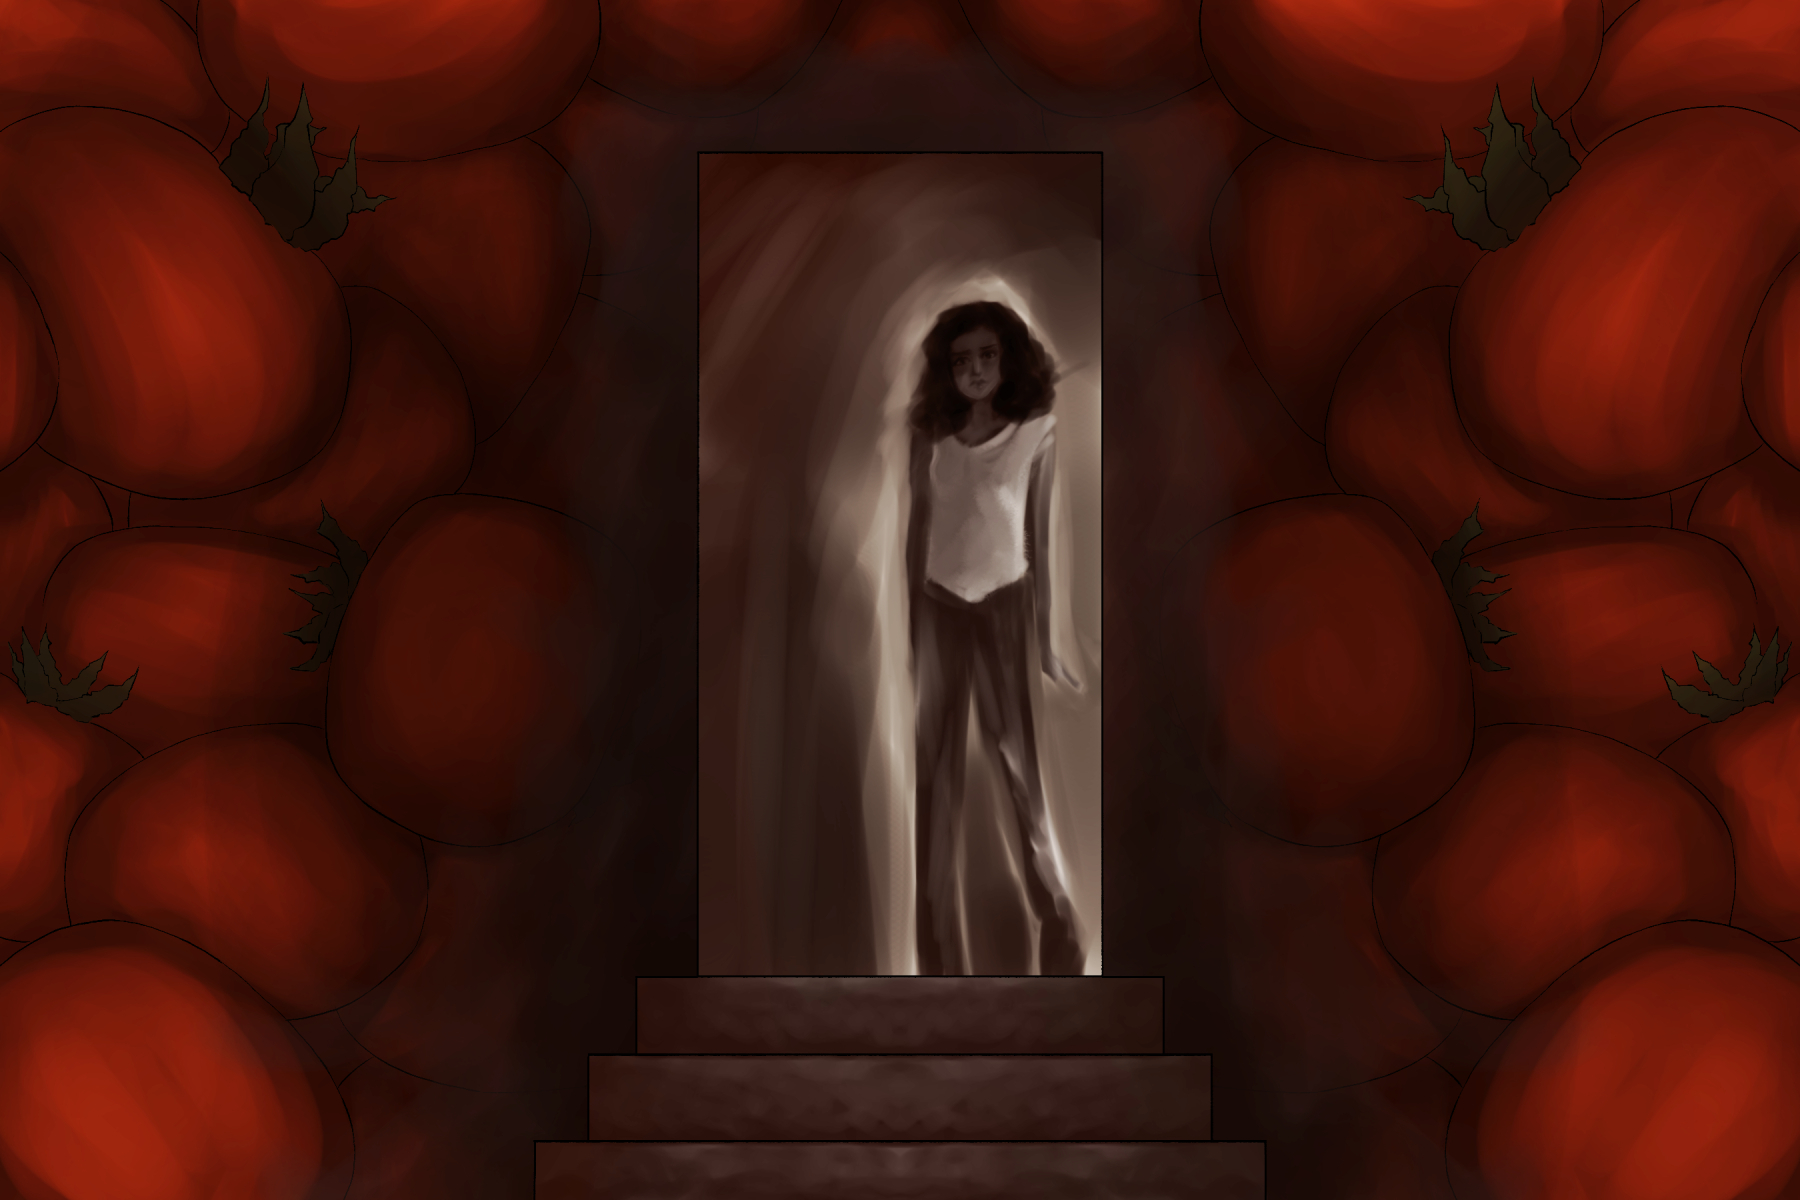 An illustration of a woman standing at the door of a dark basement with walls covered in red.